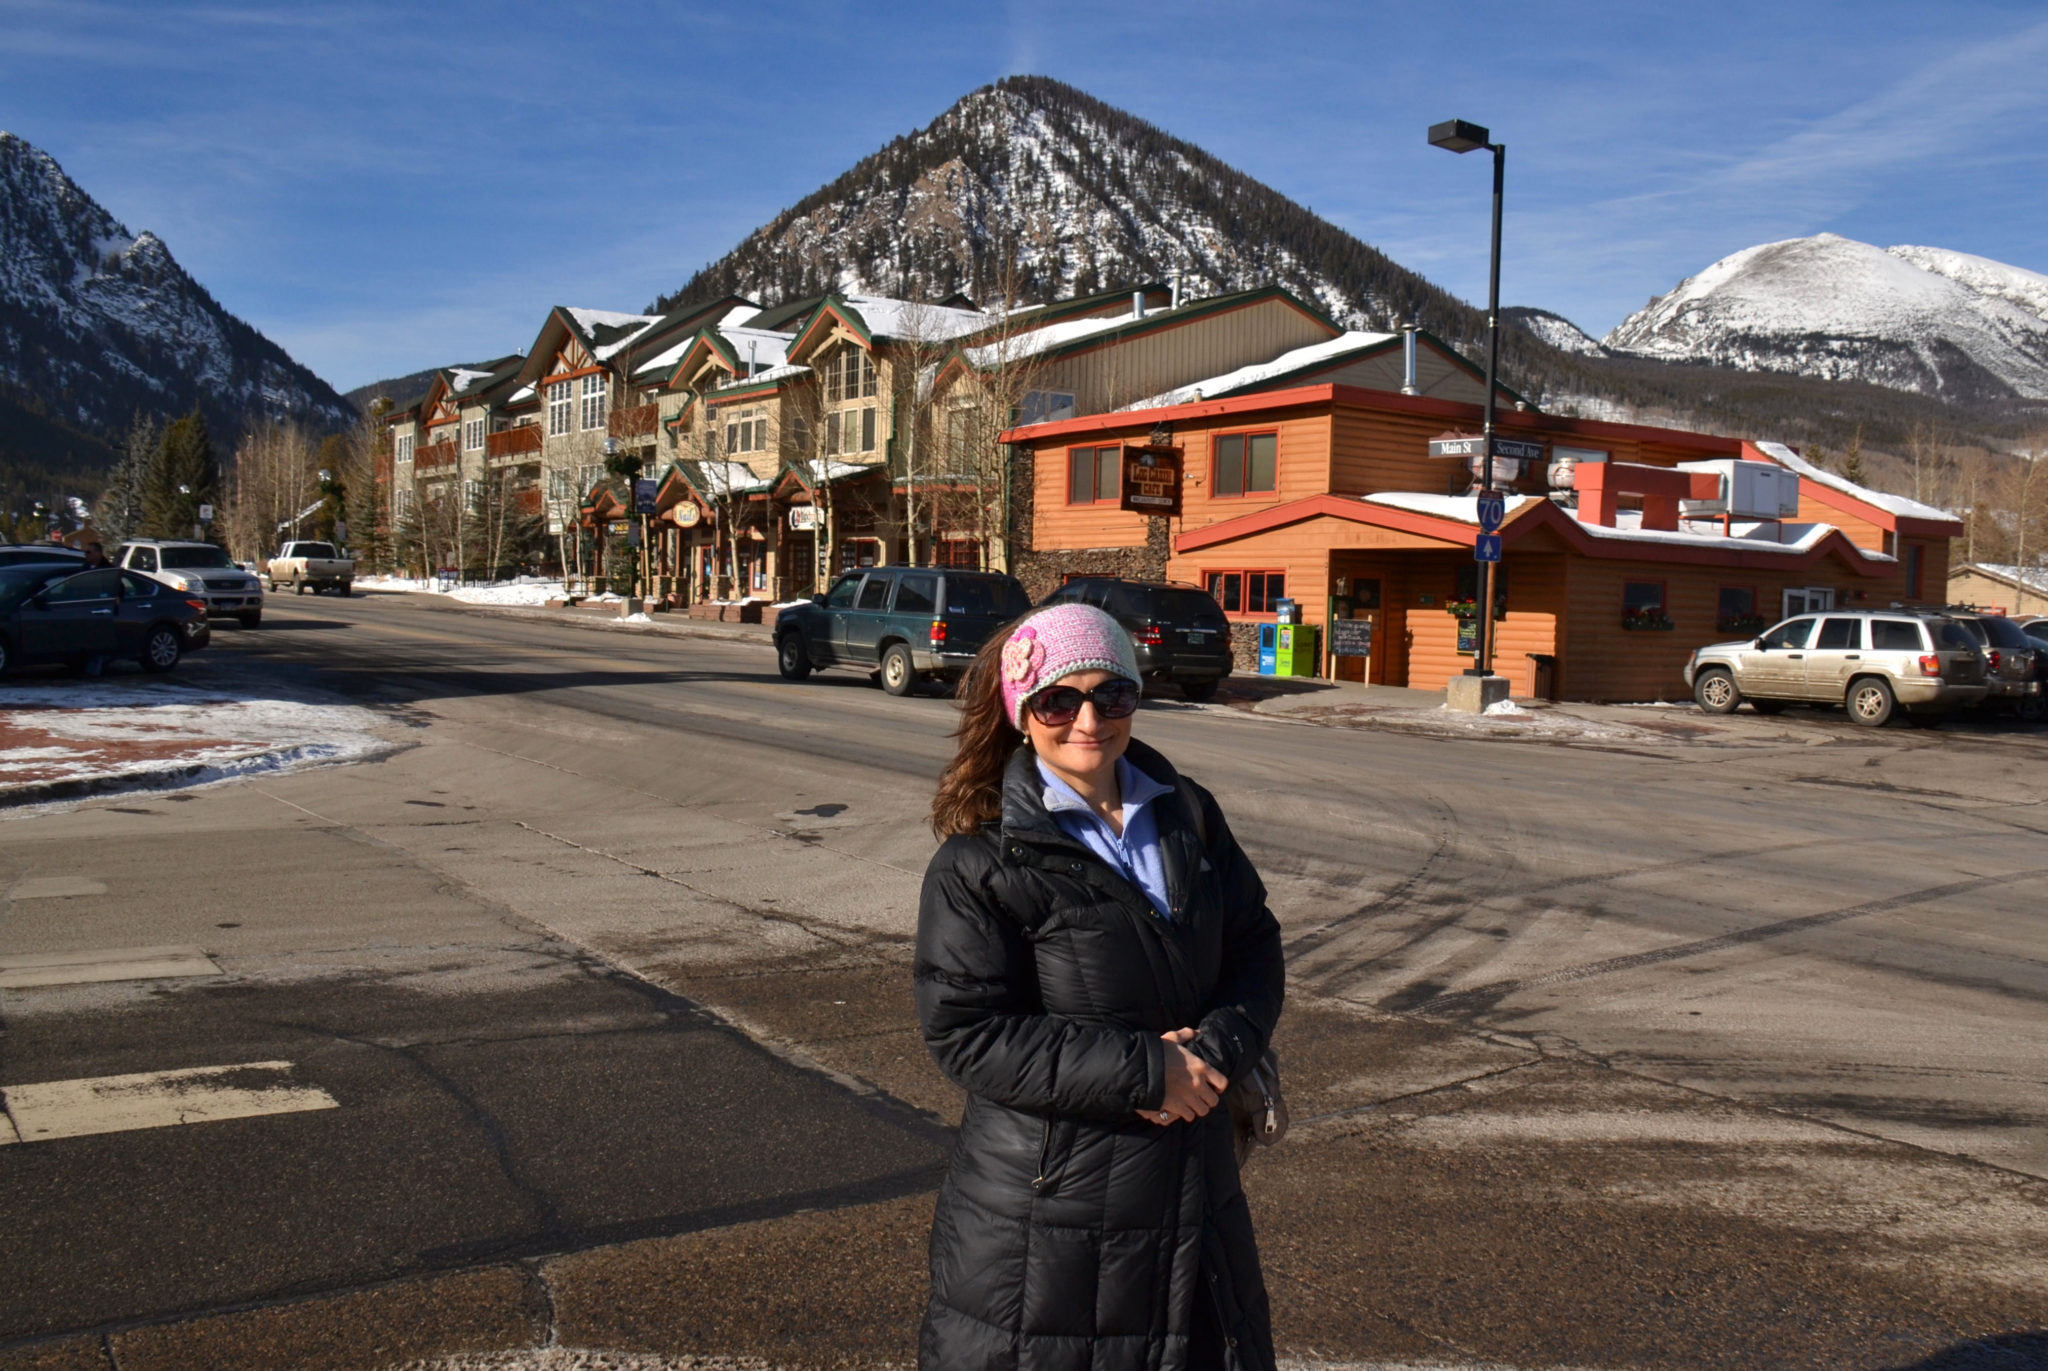 Standing in downtown Frisco, Colorado